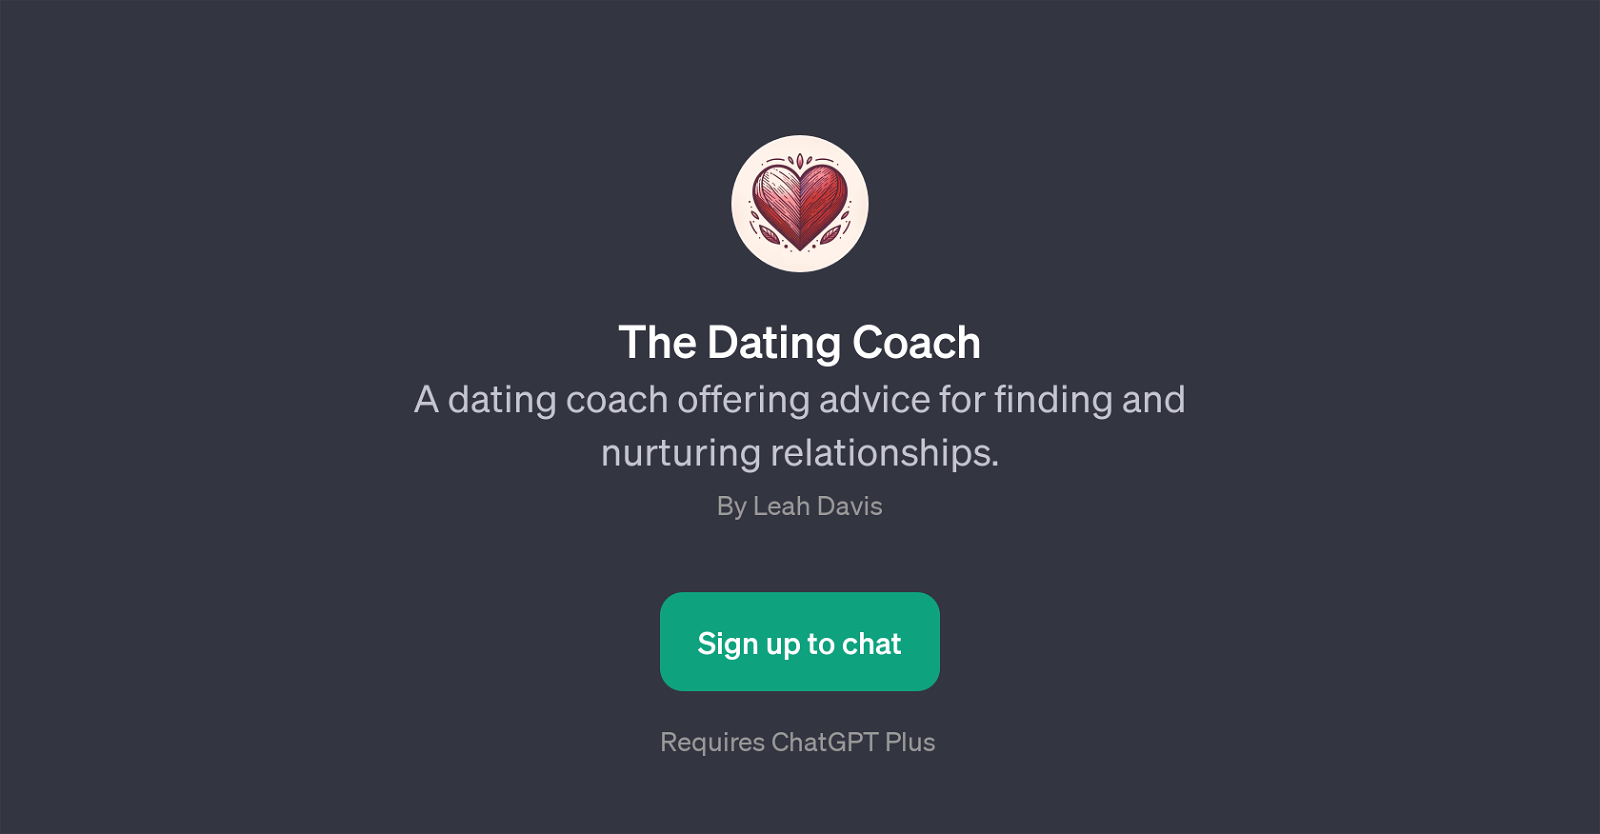 The Dating Coach website